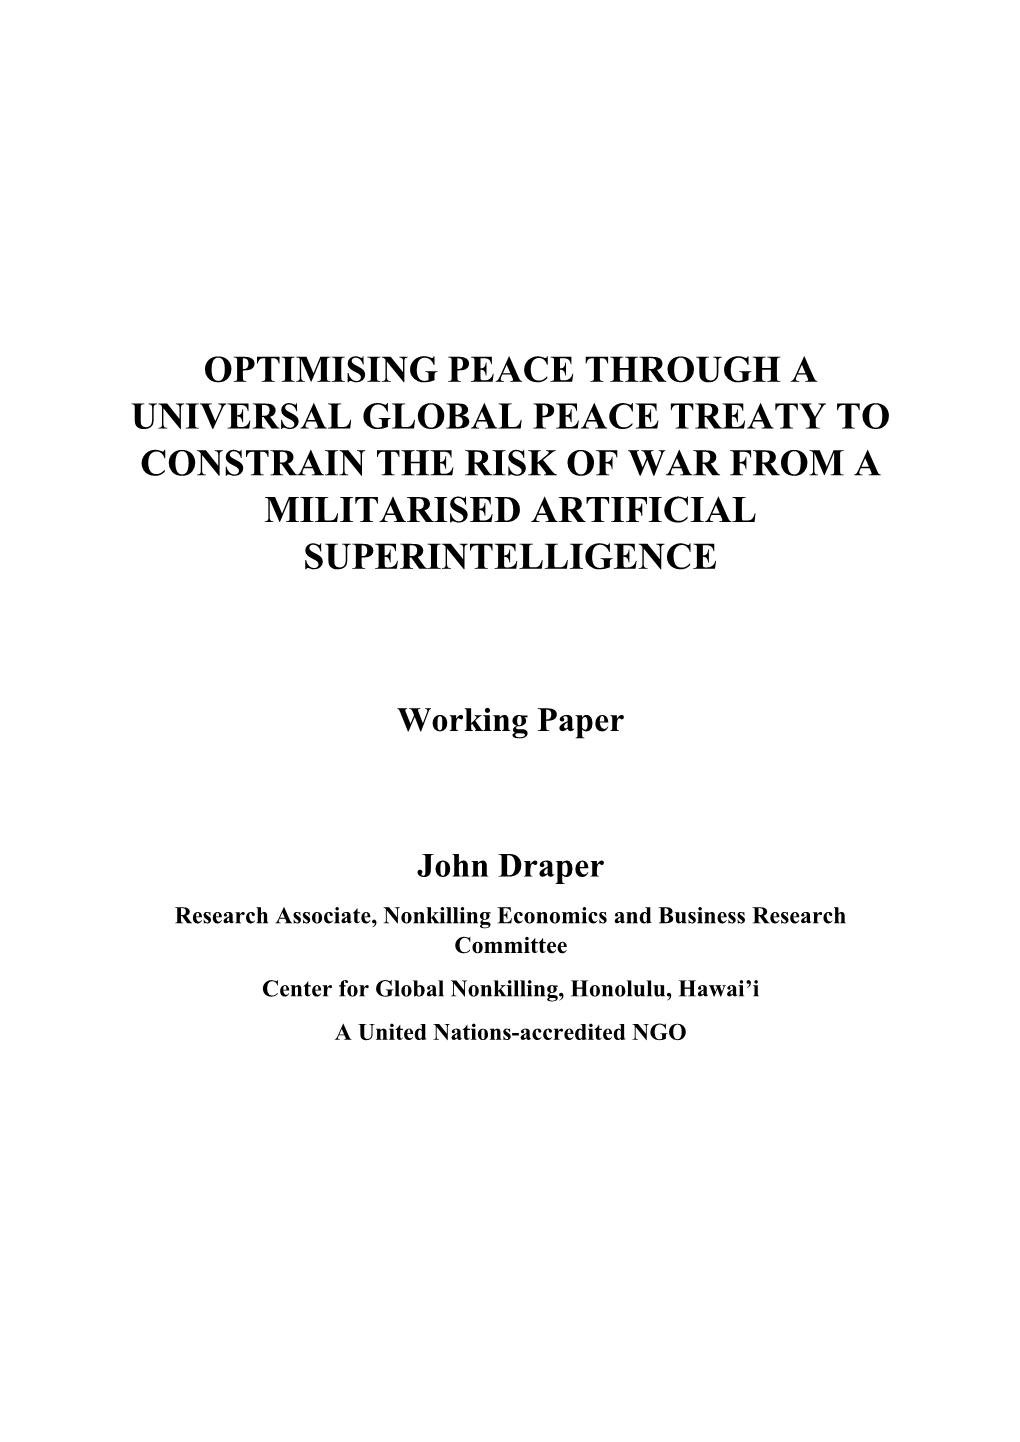 Optimising Peace Through a Universal Global Peace Treaty to Constrain the Risk of War from a Militarised Artificial Superintelligence